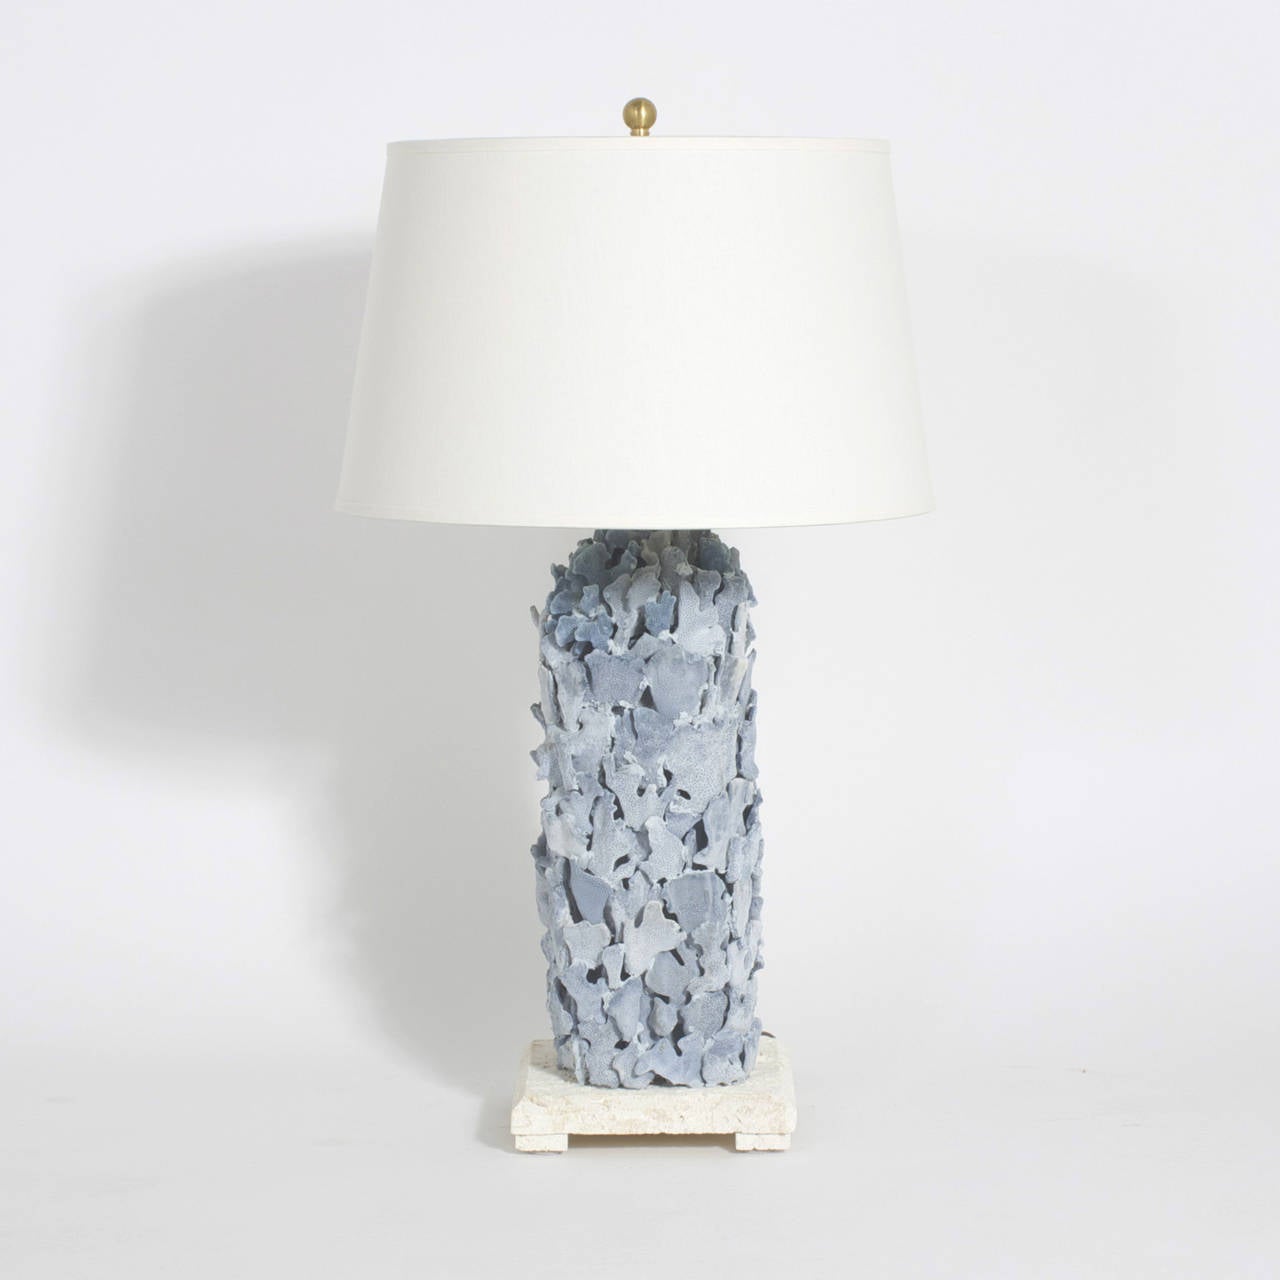 Pair of organic Coral table lamps made from authentic Natural Blue Coral and repurposed by F.S. Henemader. These are one of a kind stylish lamps with pure form with the perfect proportions and coquina bases. Mother Nature would be proud.

 and